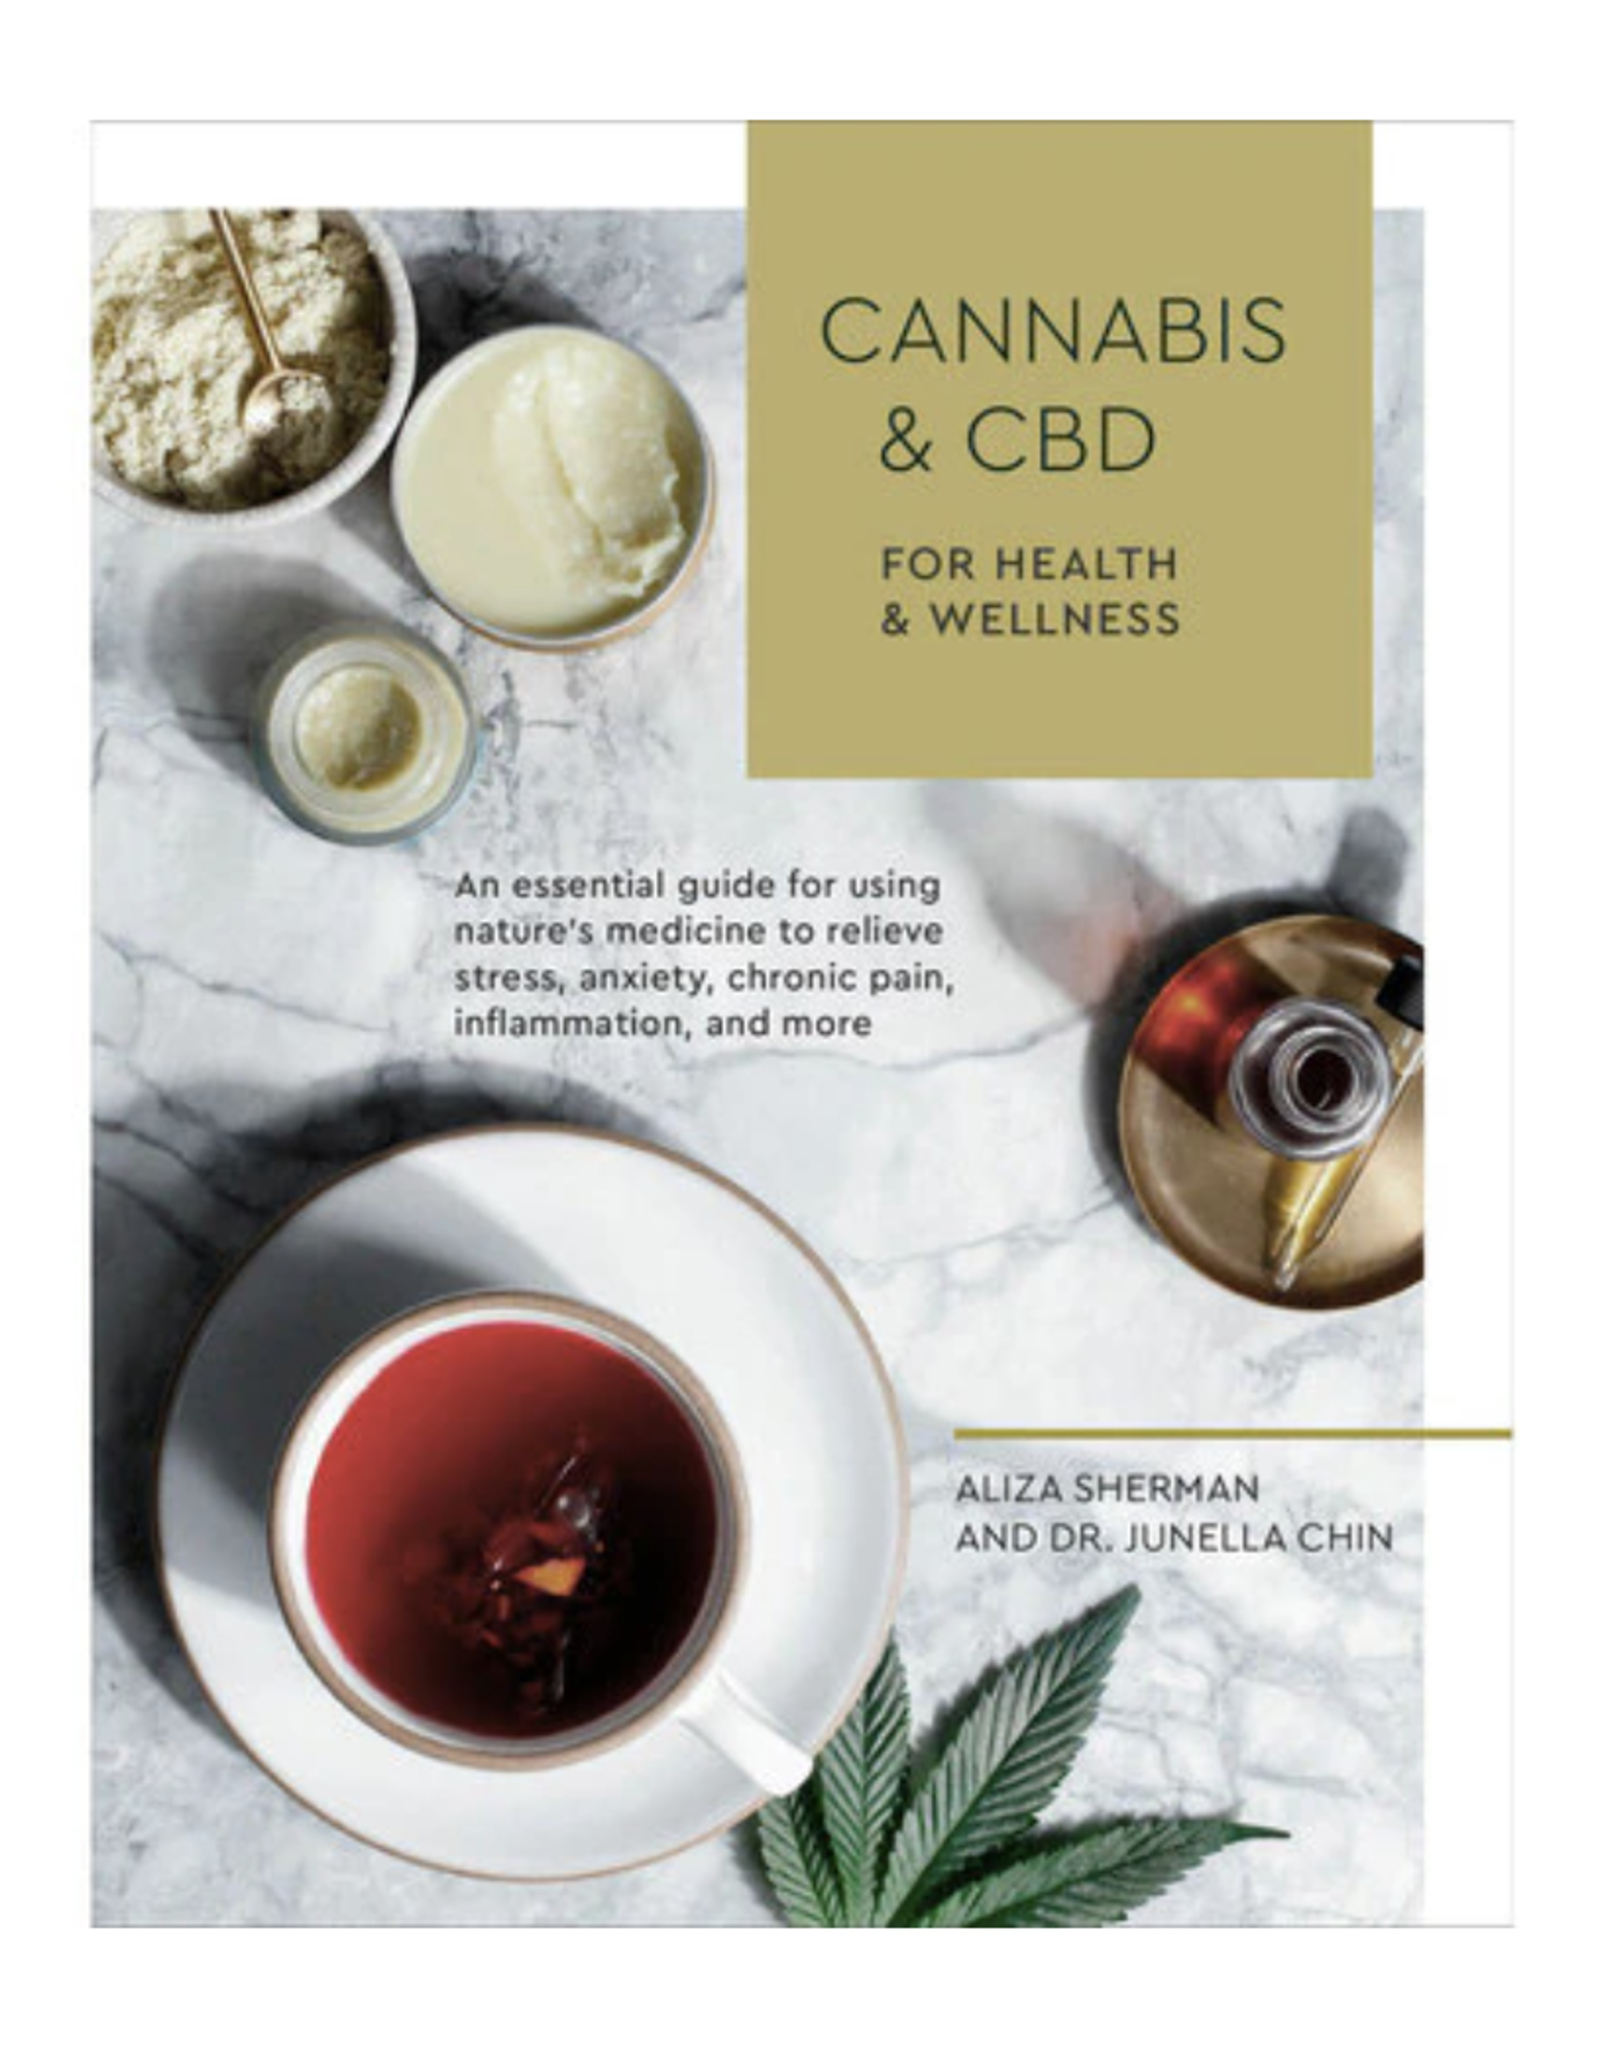 Cannabis & CBD for Health and Wellness: An Essential Guide for Using Nature's Medicine to Relieve Stress, Anxiety, Chronic Pain, Inflammation, and More by Aliza Sherman and Dr. Junella Chin